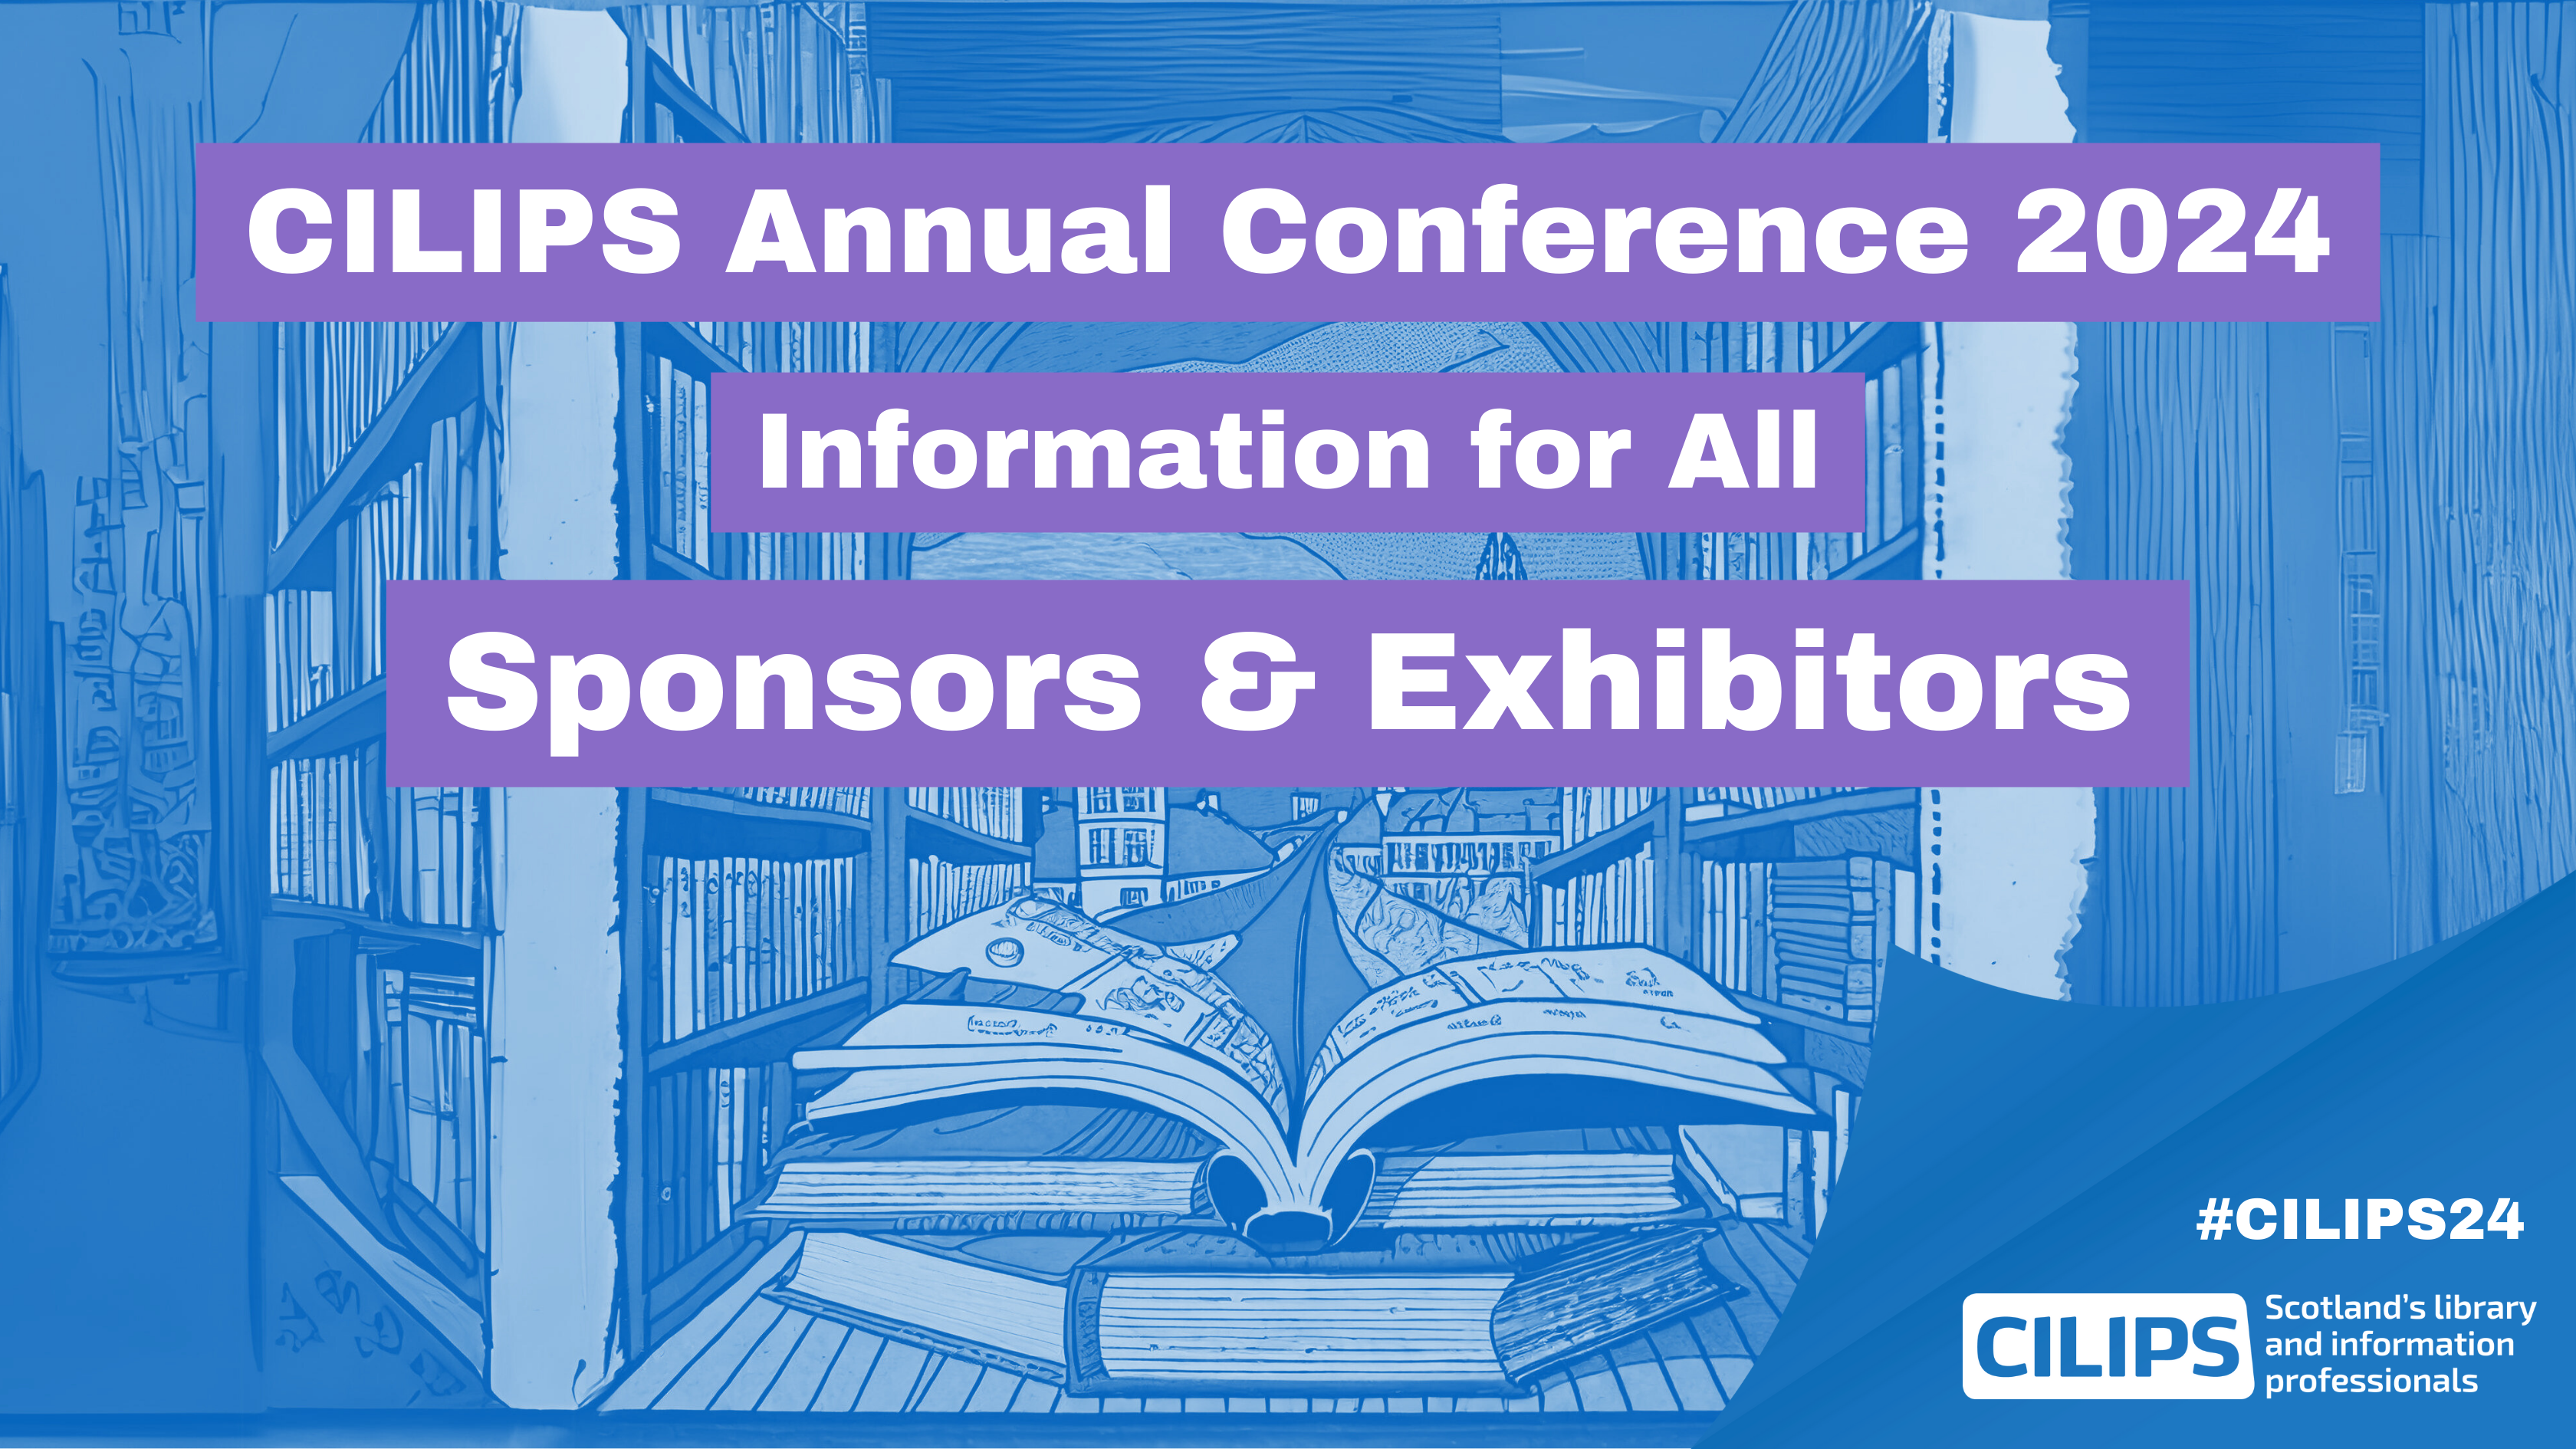 CILIPS Annual Conference 2024, Information for All, Sponsors and Exhibitors.